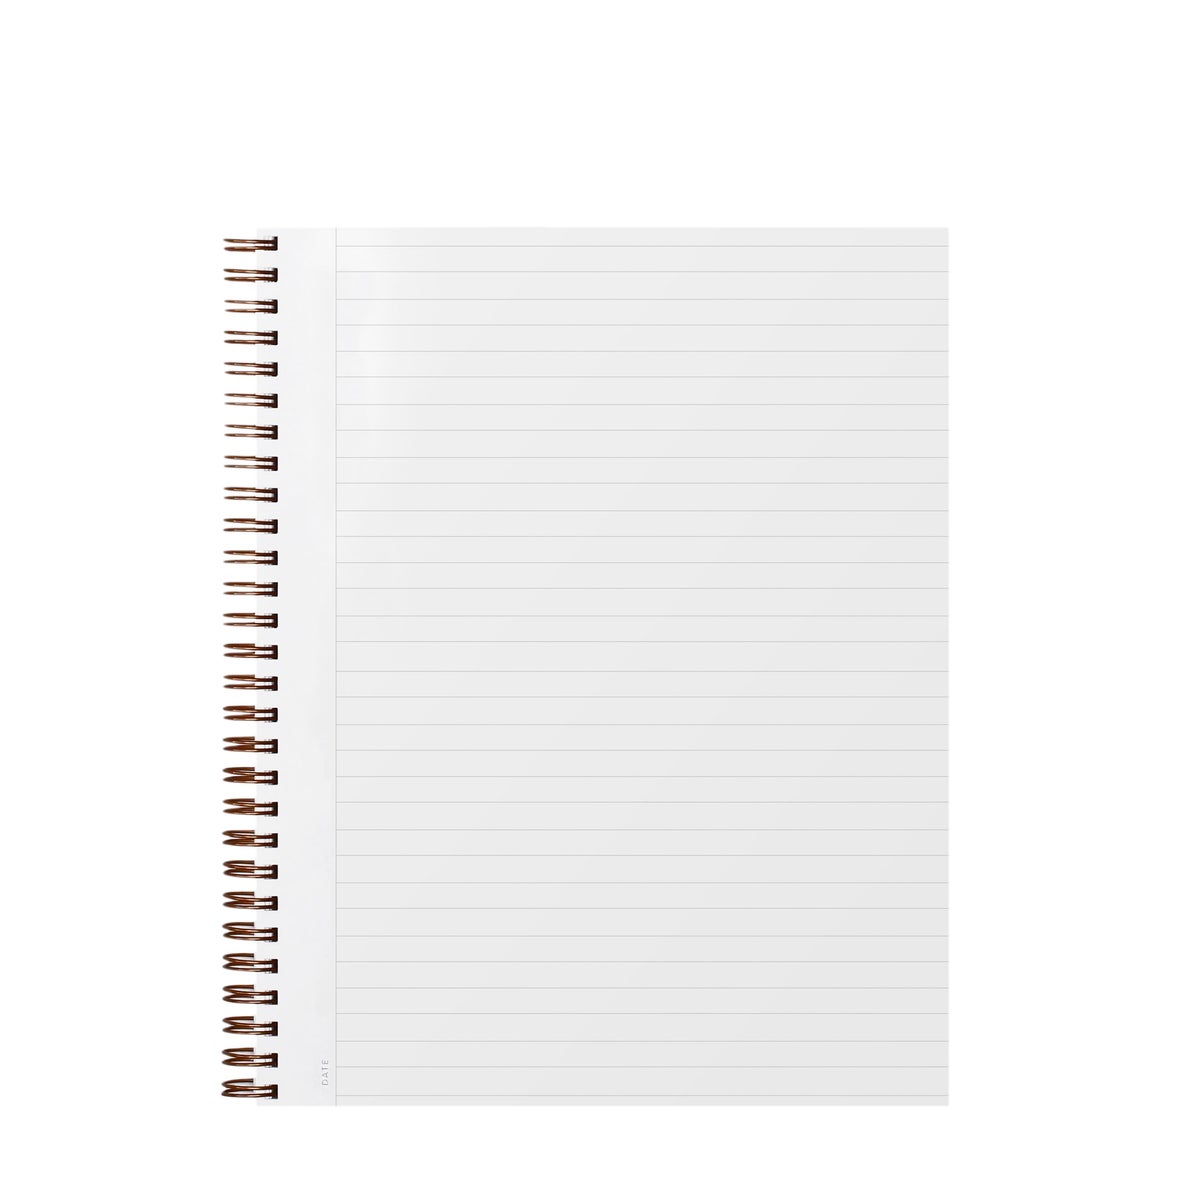 APPOINTED - NOTEBOOK - DOVE GREY - LINED